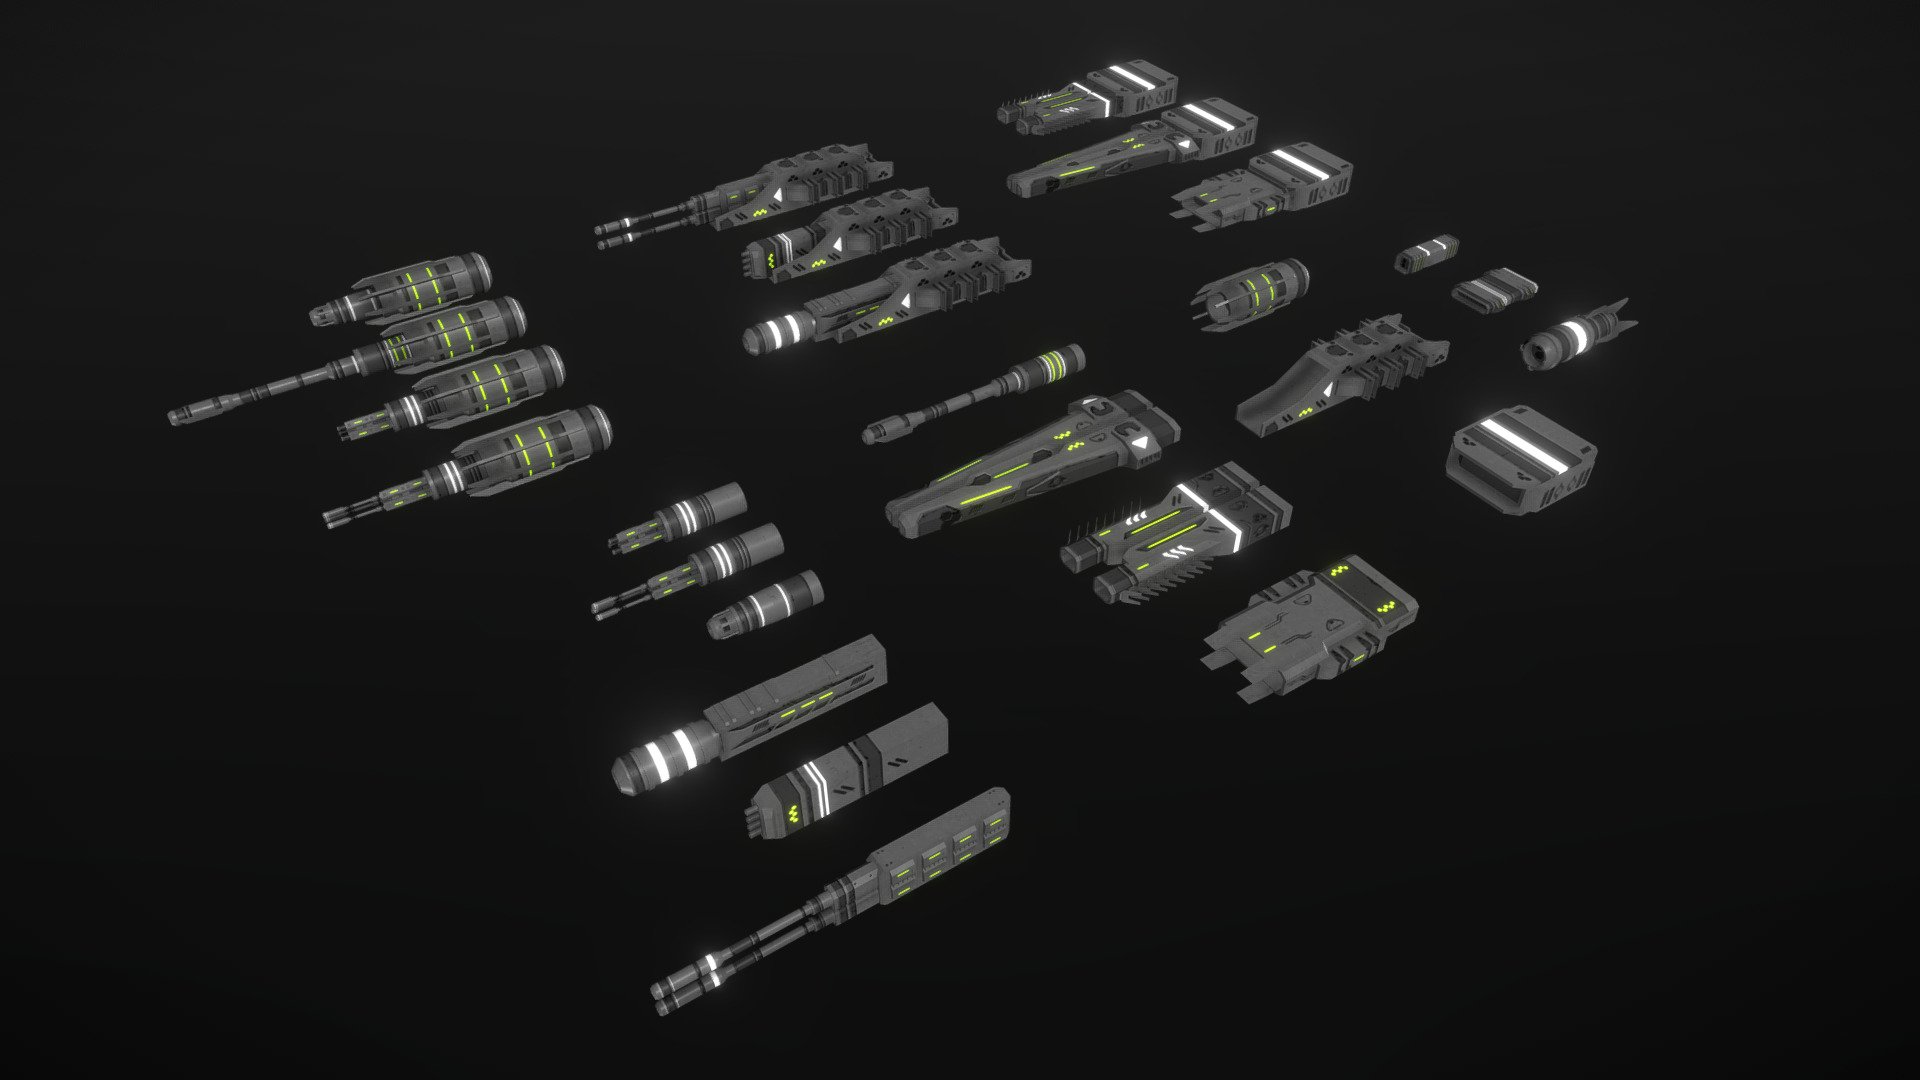 This arre low-poly and game-ready modular scifi spaceship fighter wepons. 

The weapons are separate meshes and can be animated with a keyframe animation tool. The weapon loadout can be changed too. 

The PSD file with intact layers is included.

If you have purchased this model please make sure to download the “additional file”.  It contains FBX and OBJ meshes, full resolution textures and the source PSDs with intact layers. The meshes are separate and can be animated (e.g. firing animations for gun barrels, etc) 3d model